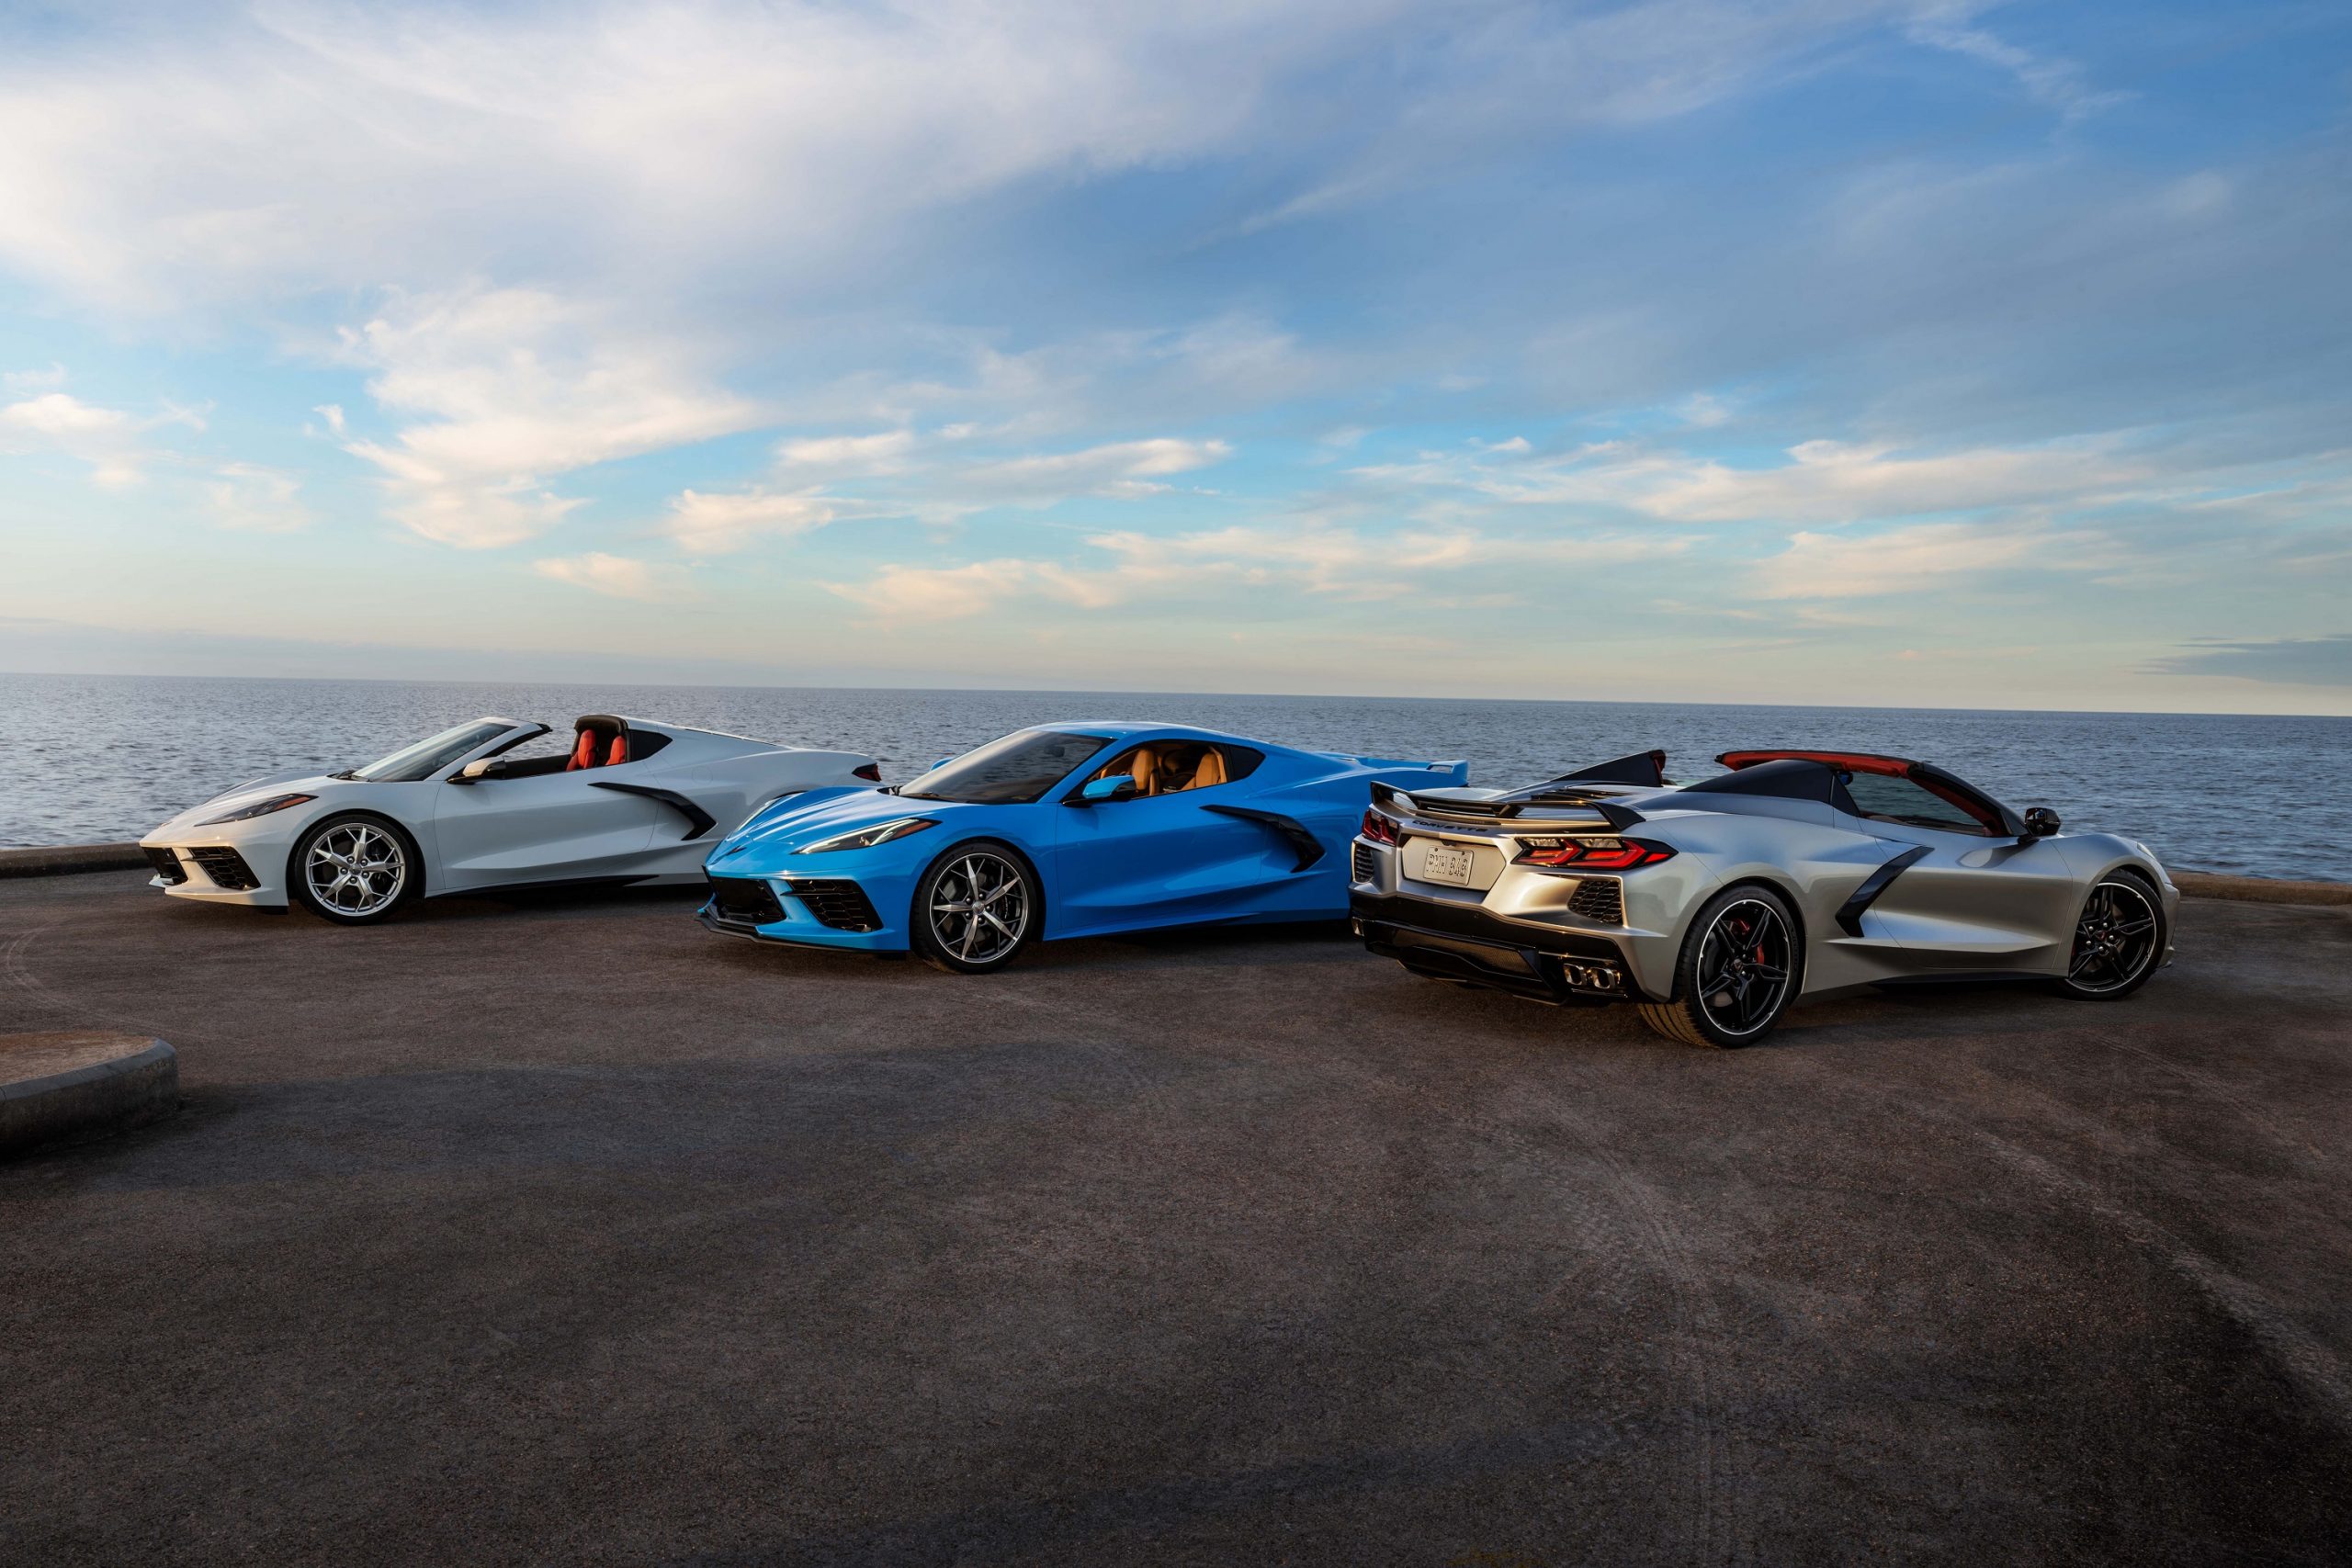 A trio of Chevrolet Corvette models shot at the 3/4 angle by the sea